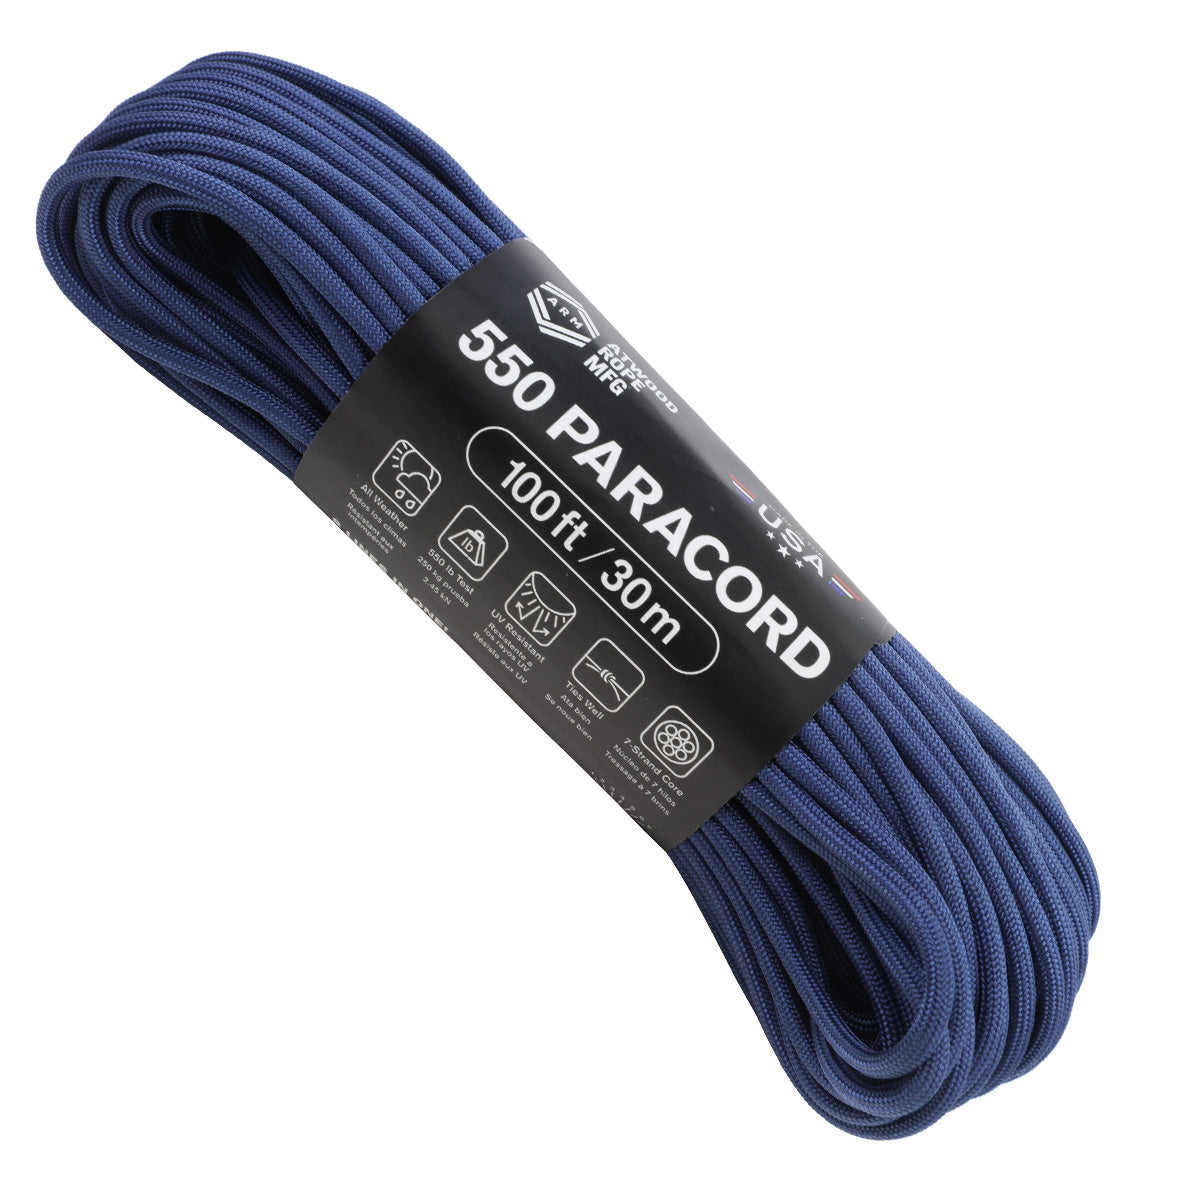 Atwood 550 Lb. Paracord 100 Ft.